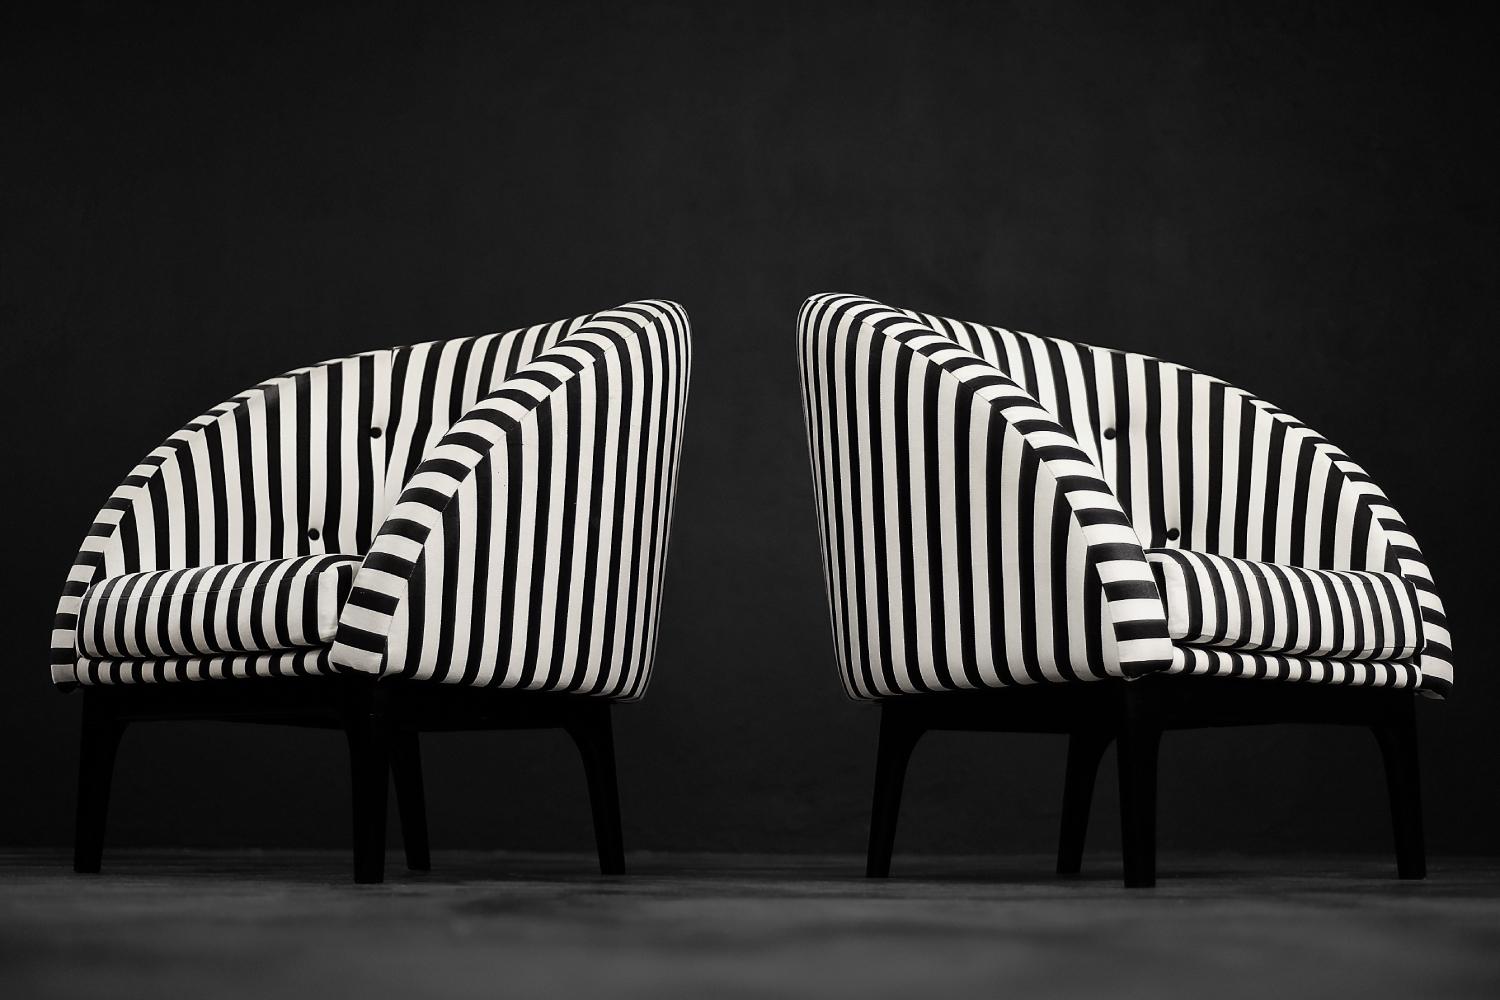 Pair of Mid-Century Scandinavian Modern Armchairs with Black&White Stripes, 1960 For Sale 8